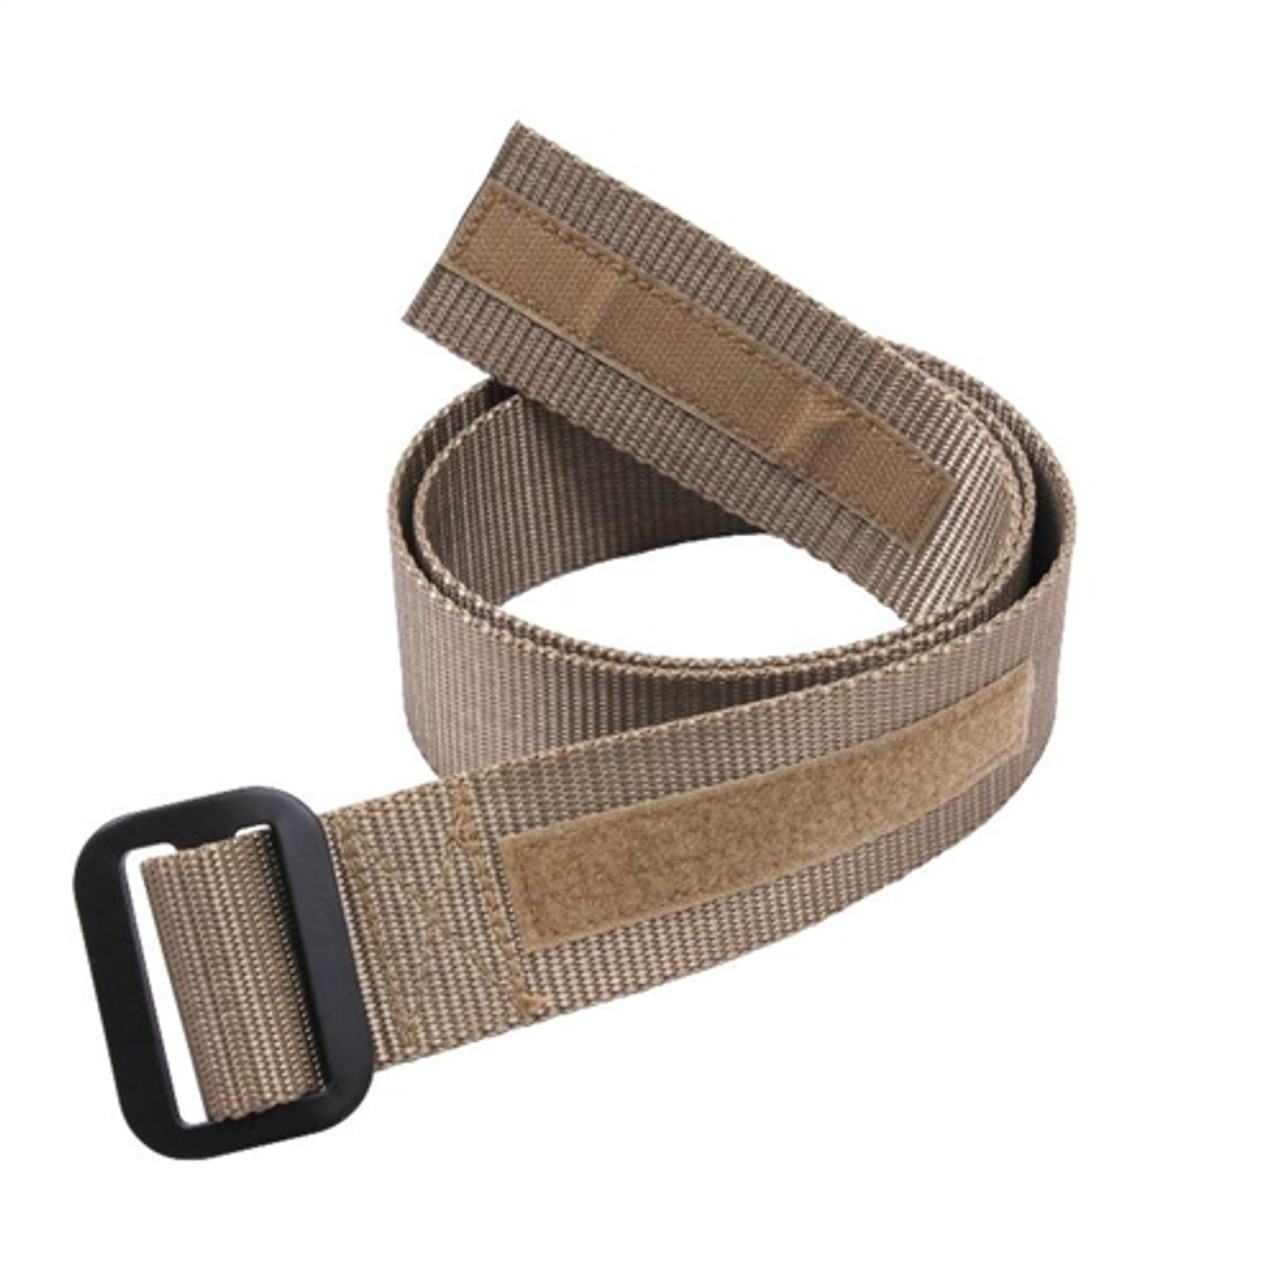 AR 670-1 Compliant Military Riggers Belt from Hessen Military